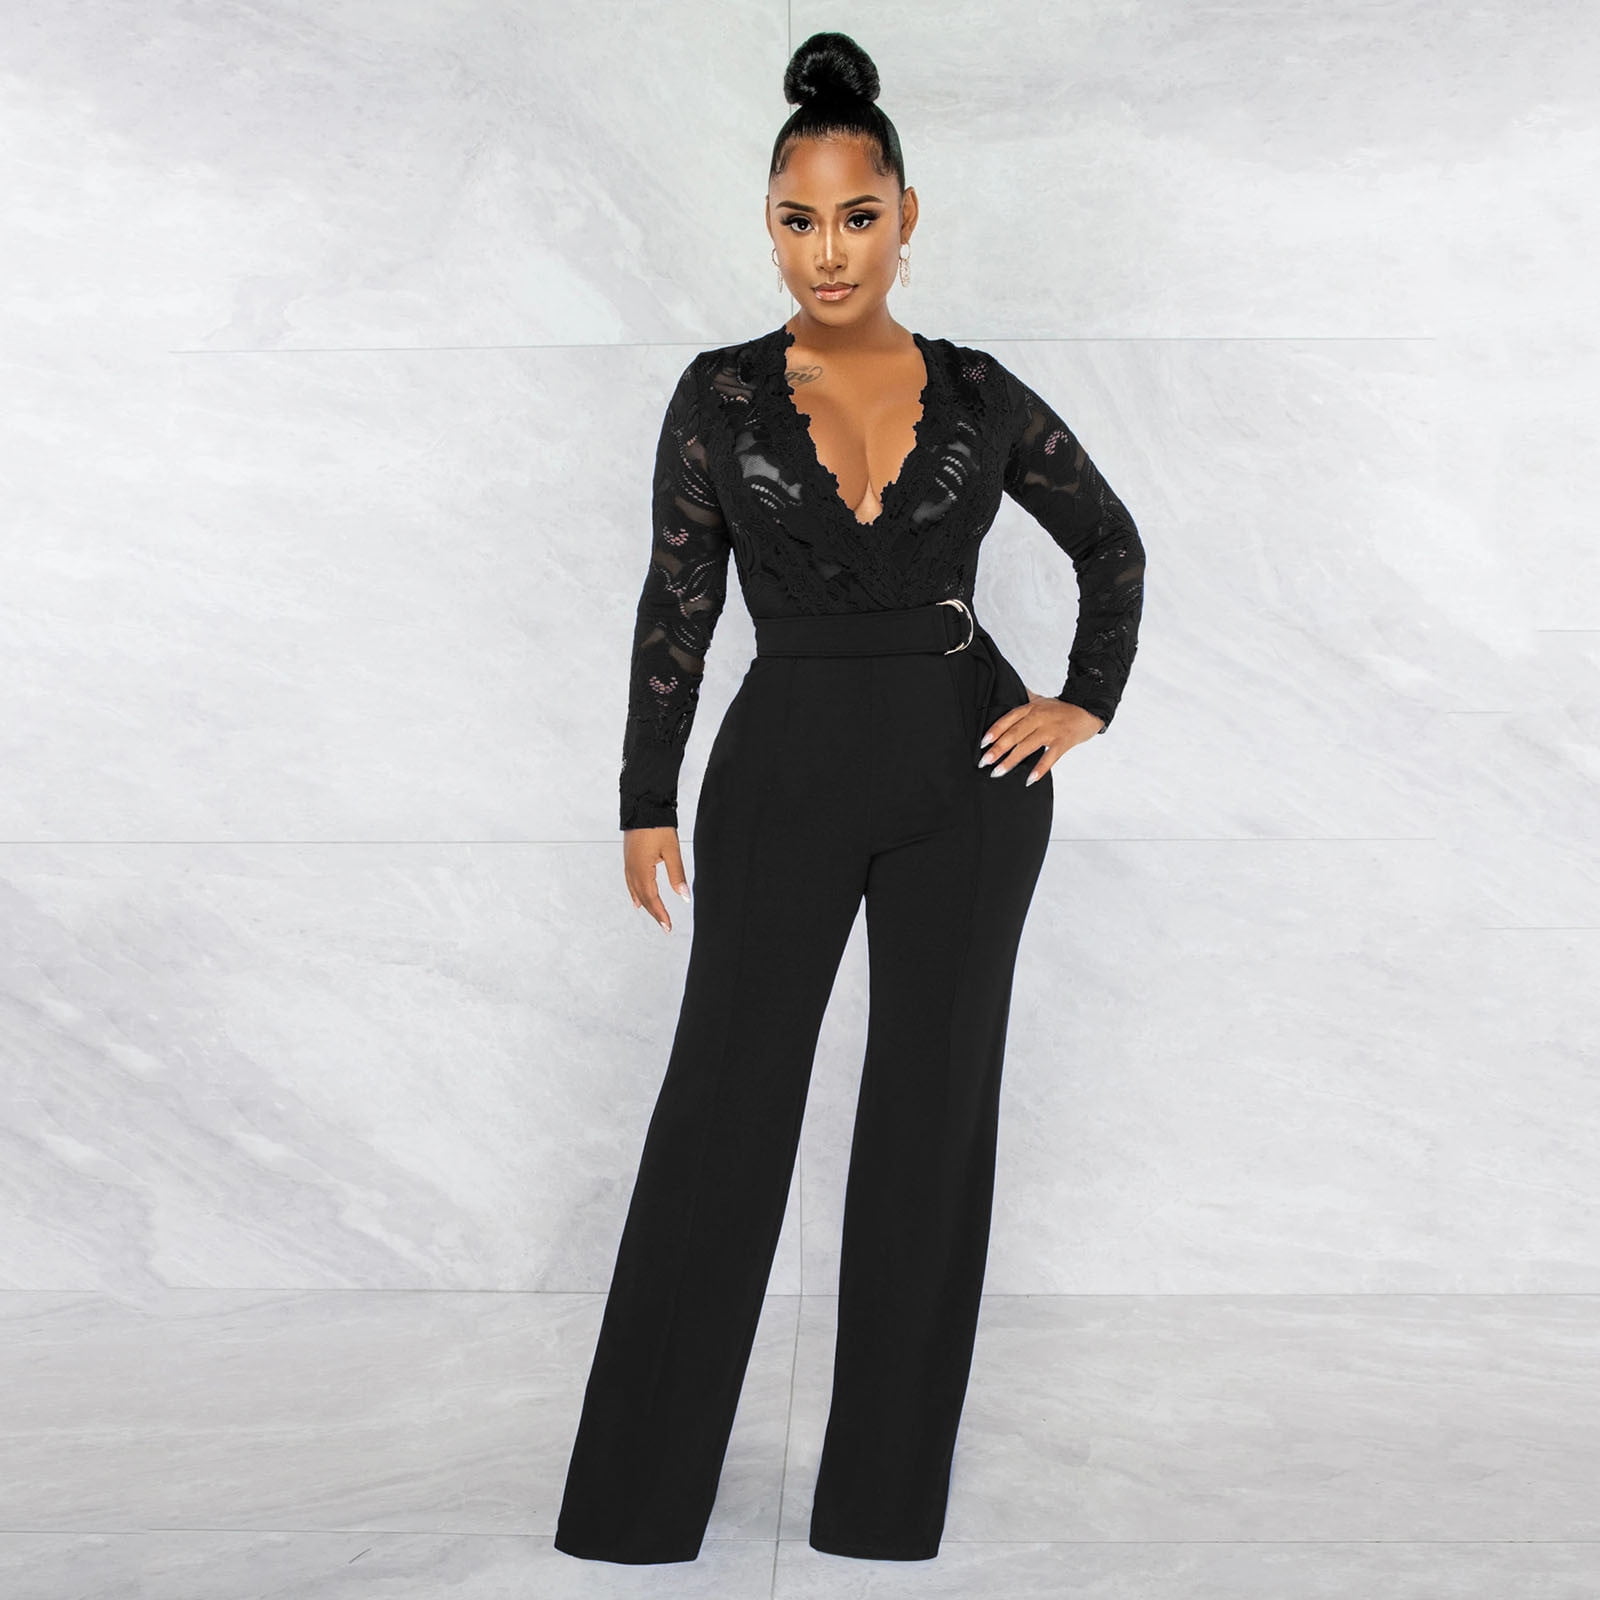 Women's Jumpsuits & Rompers | Rompers Online | SHEIN USA